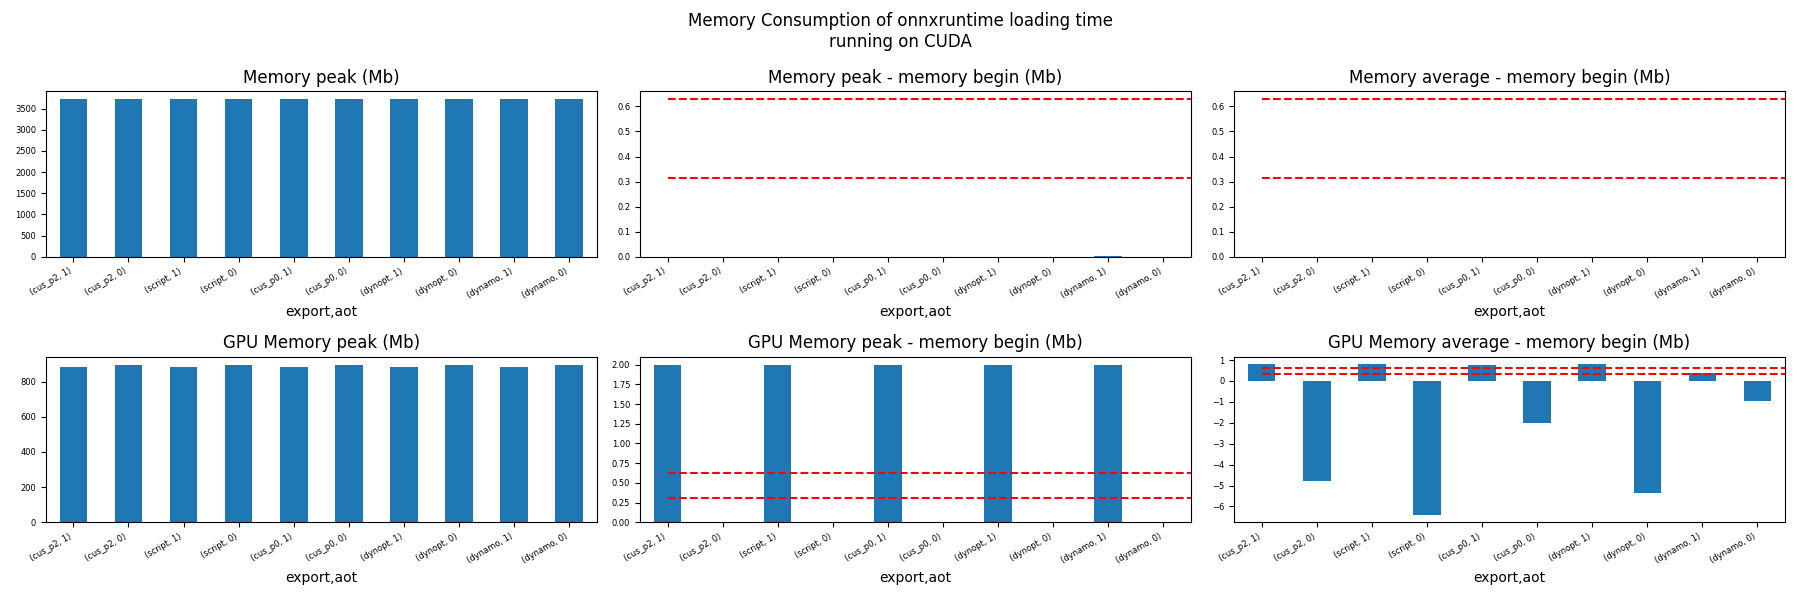 Memory Consumption of onnxruntime loading time running on CUDA, Memory peak (Mb), Memory peak - memory begin (Mb), Memory average - memory begin (Mb), GPU Memory peak (Mb), GPU Memory peak - memory begin (Mb), GPU Memory average - memory begin (Mb)